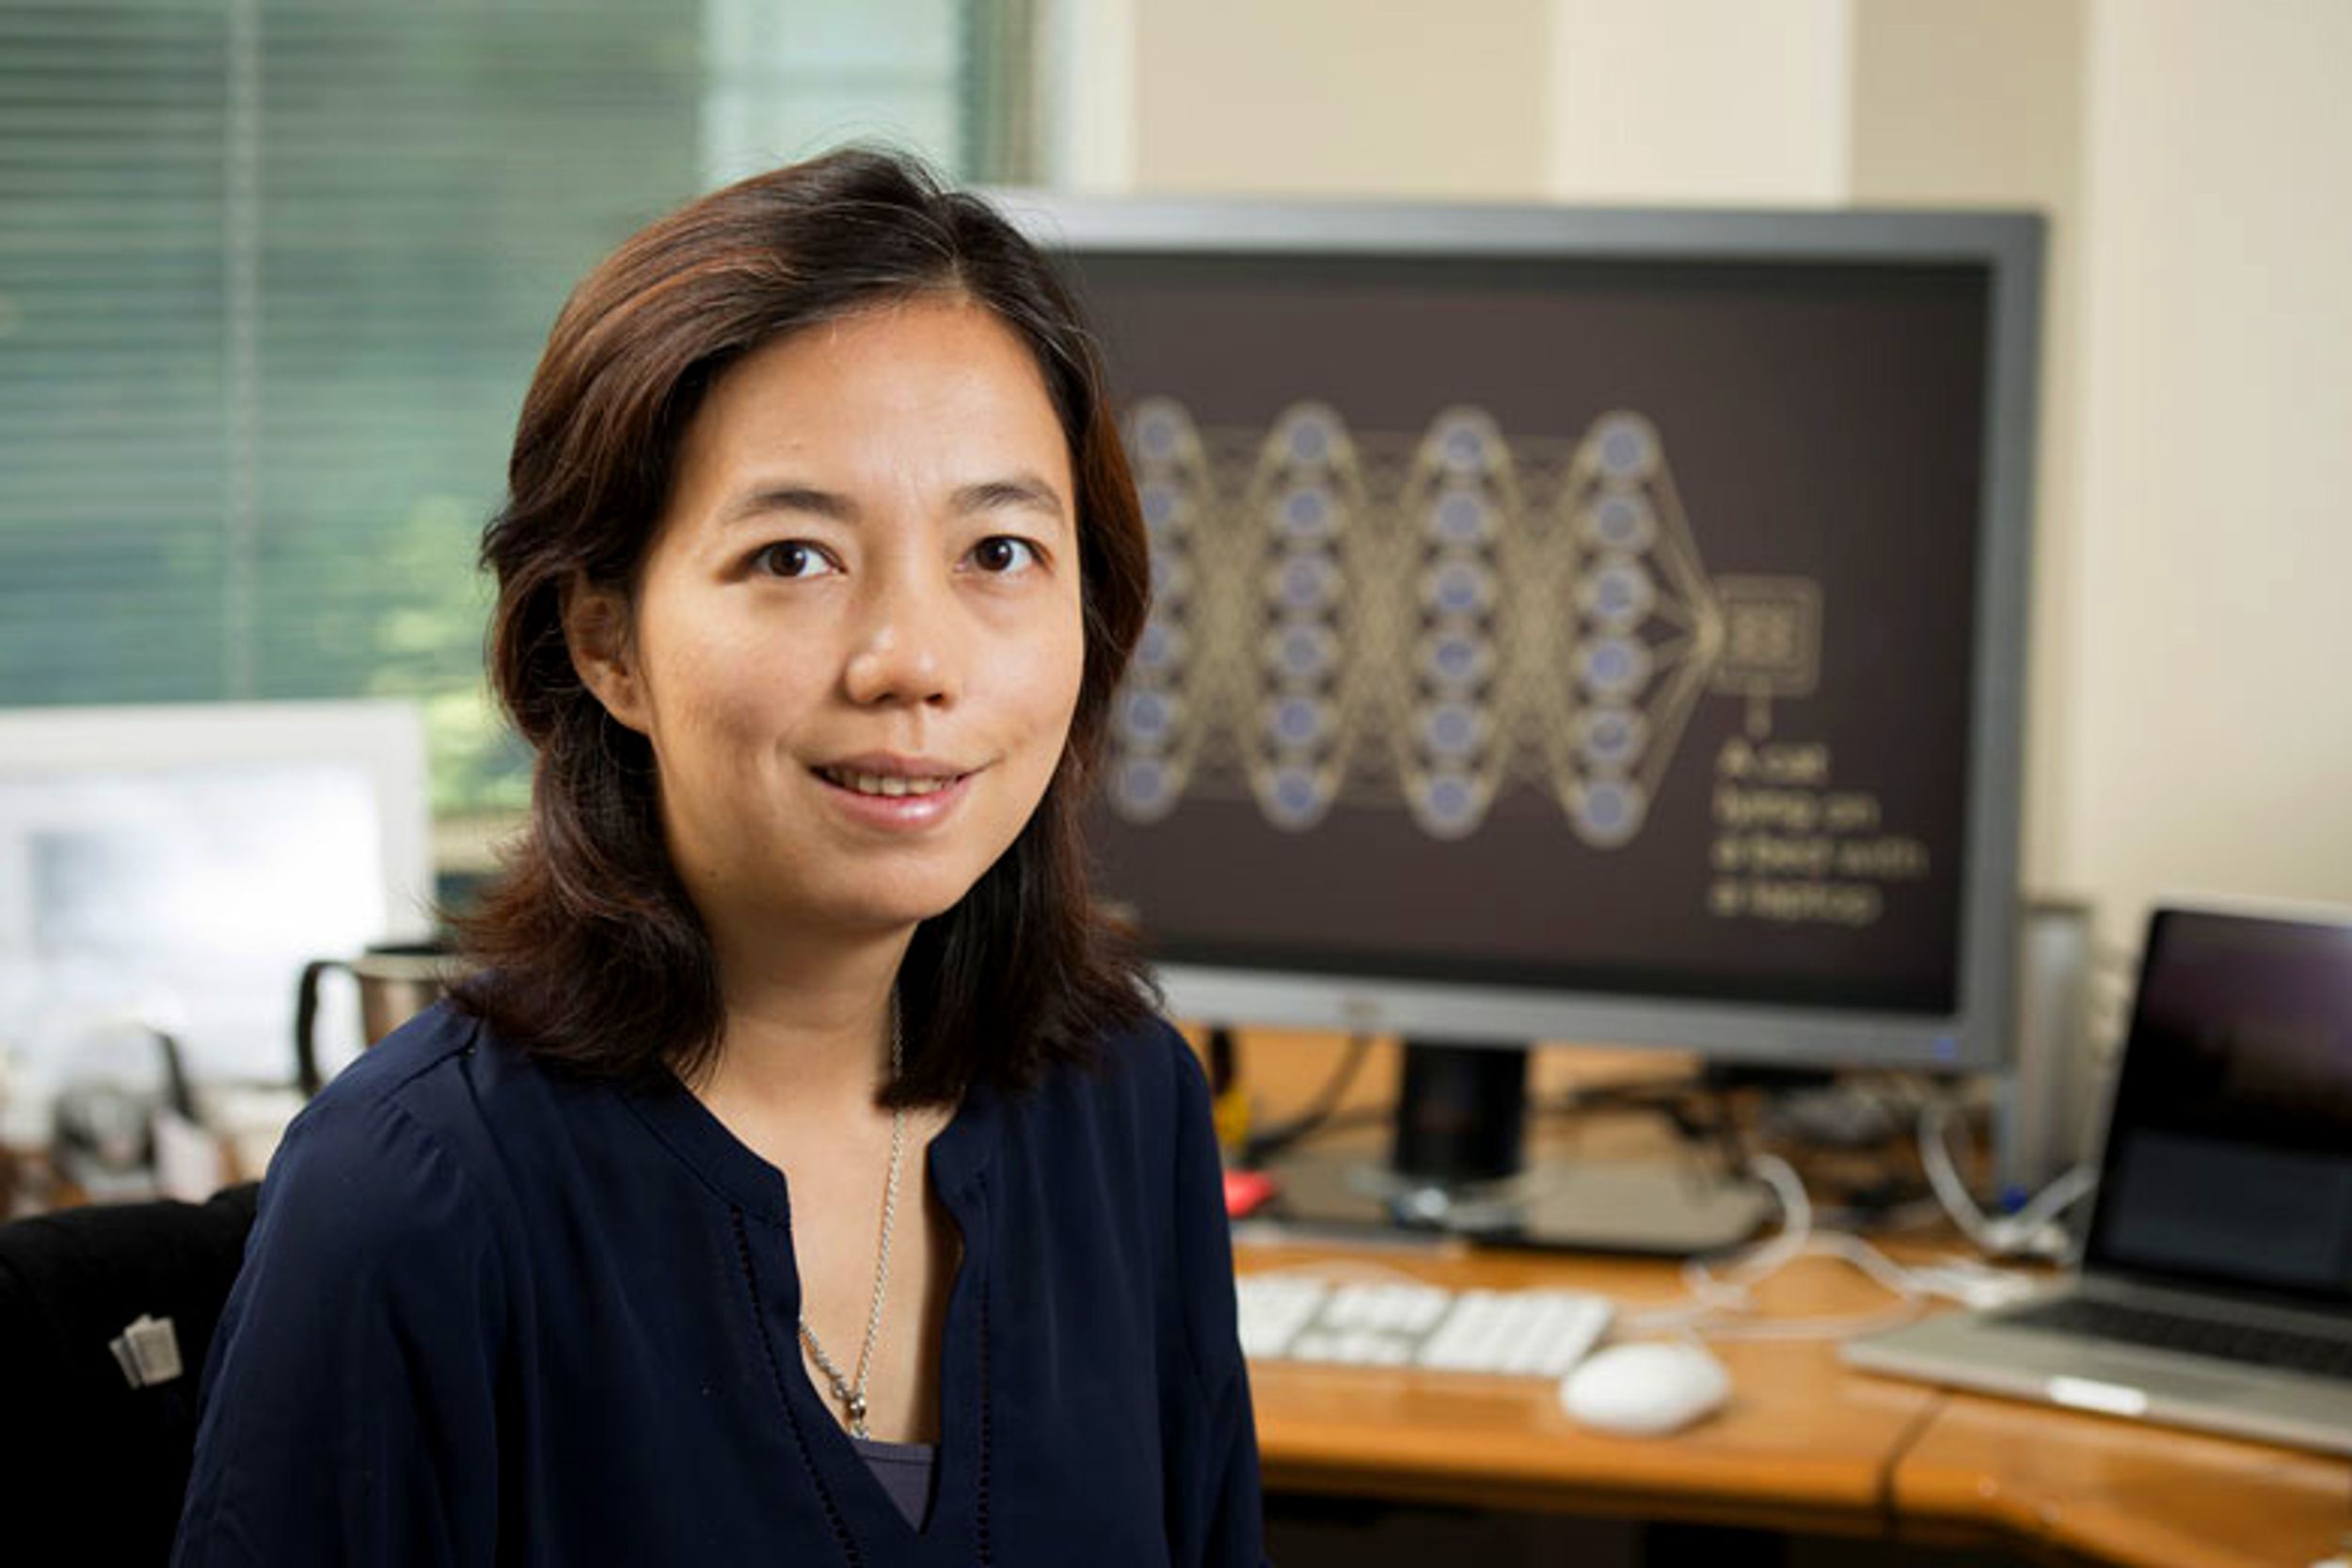 Stanford computer science professor calls for greater ethnic and gender diversity in artificial intelligence